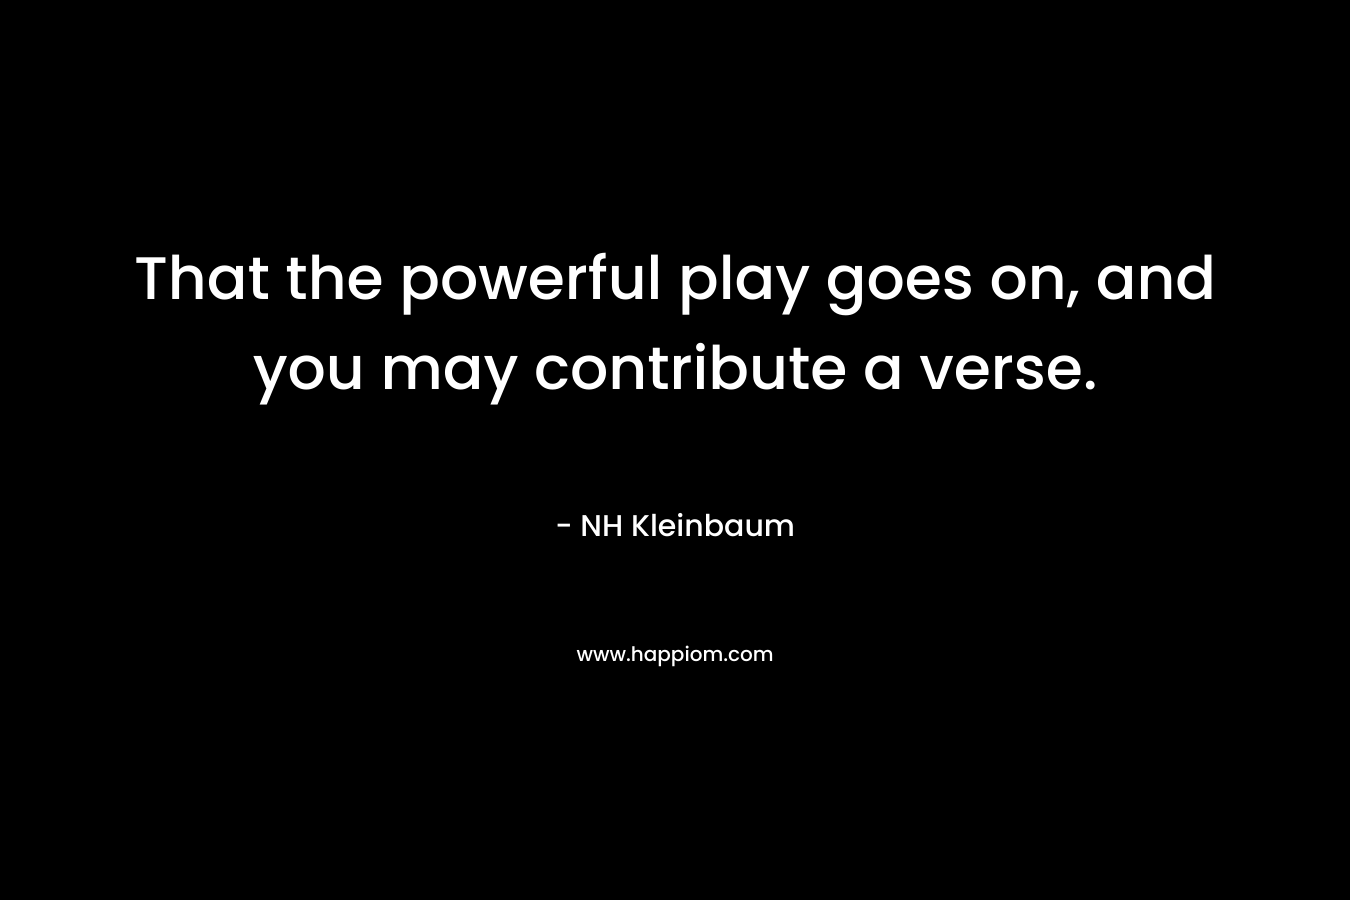 That the powerful play goes on, and you may contribute a verse. – NH Kleinbaum